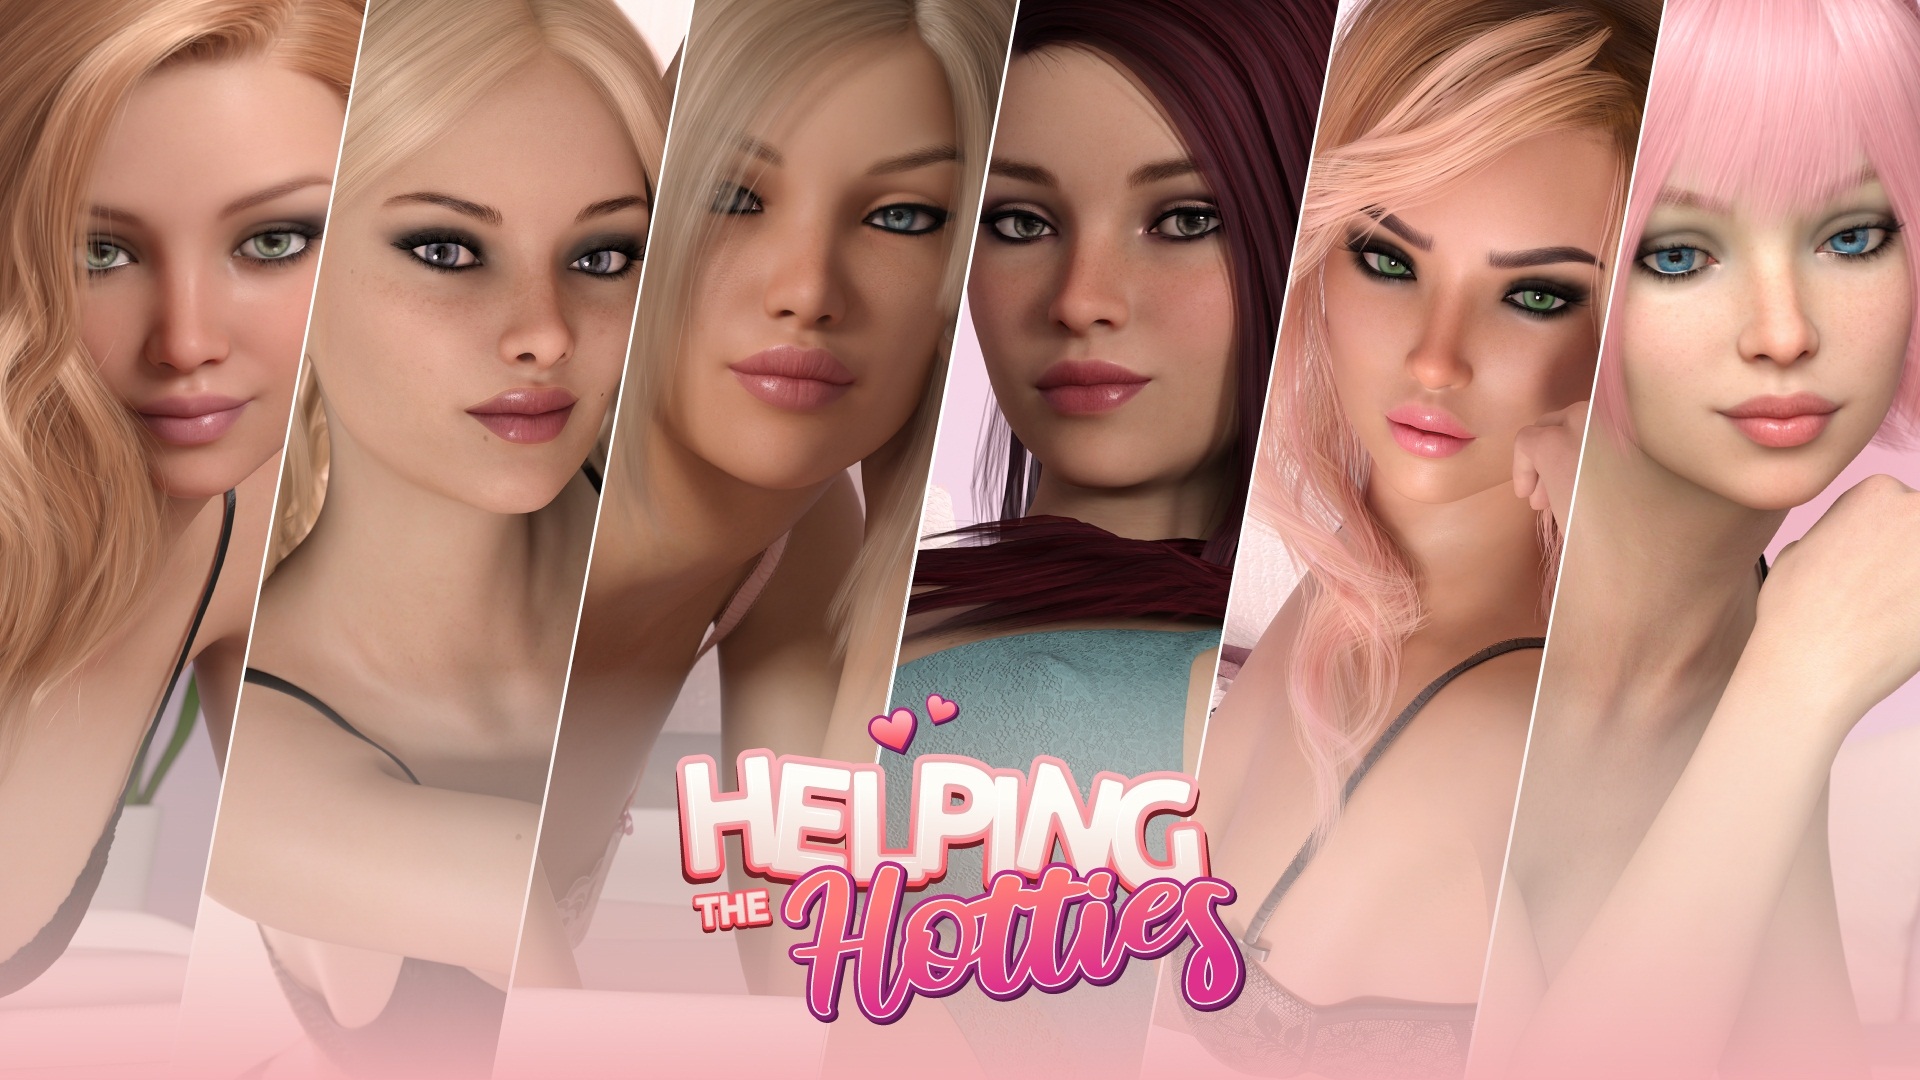 Download Porn Game: Helping The Hotties by xRed Games. Formerly known as Red Falls.​